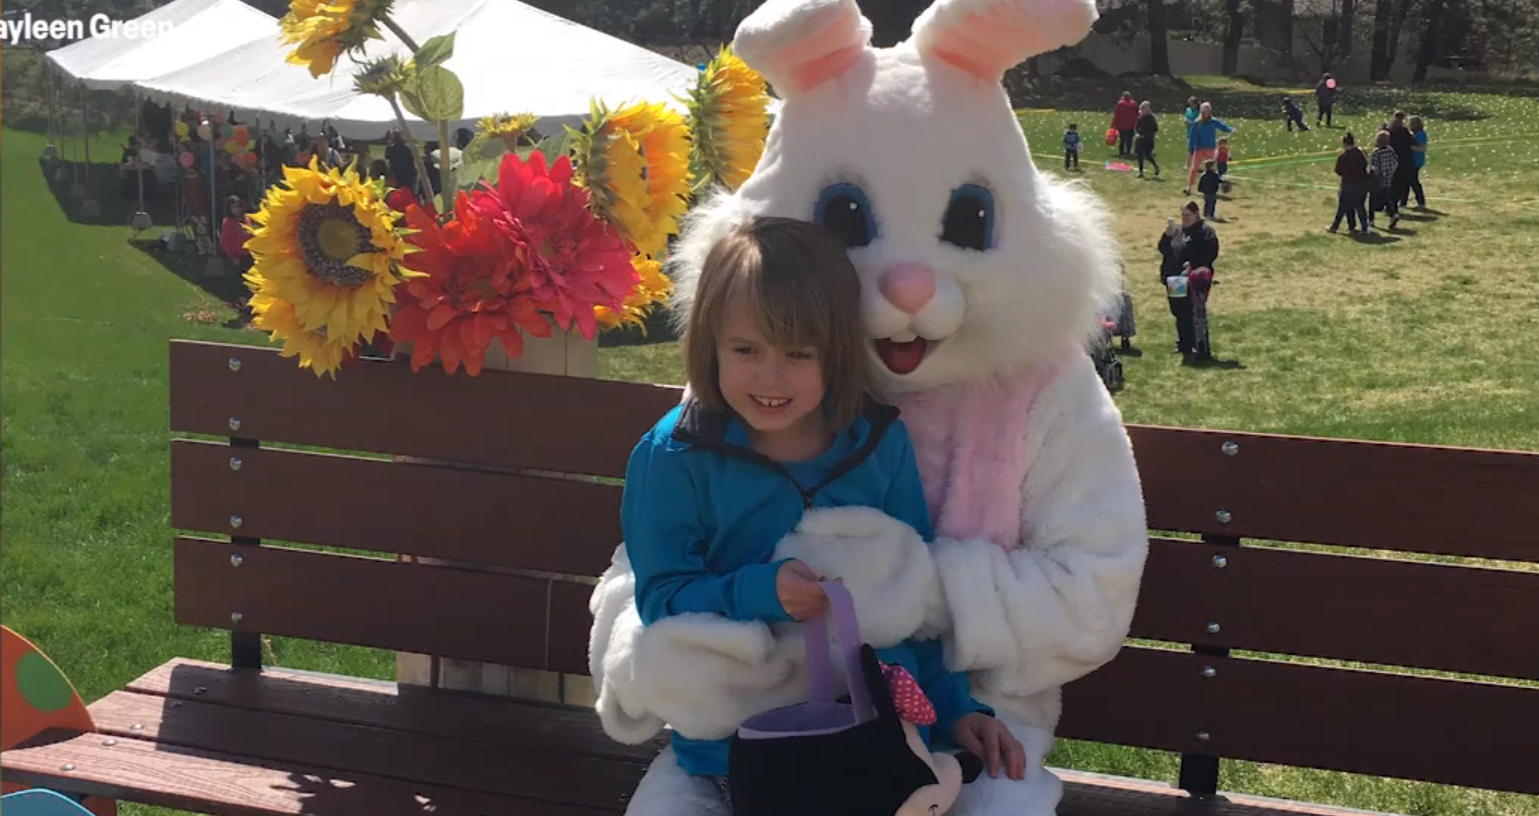 Local teens eagerly await 2nd annual sensory supportive Easter egg hunt [Video]